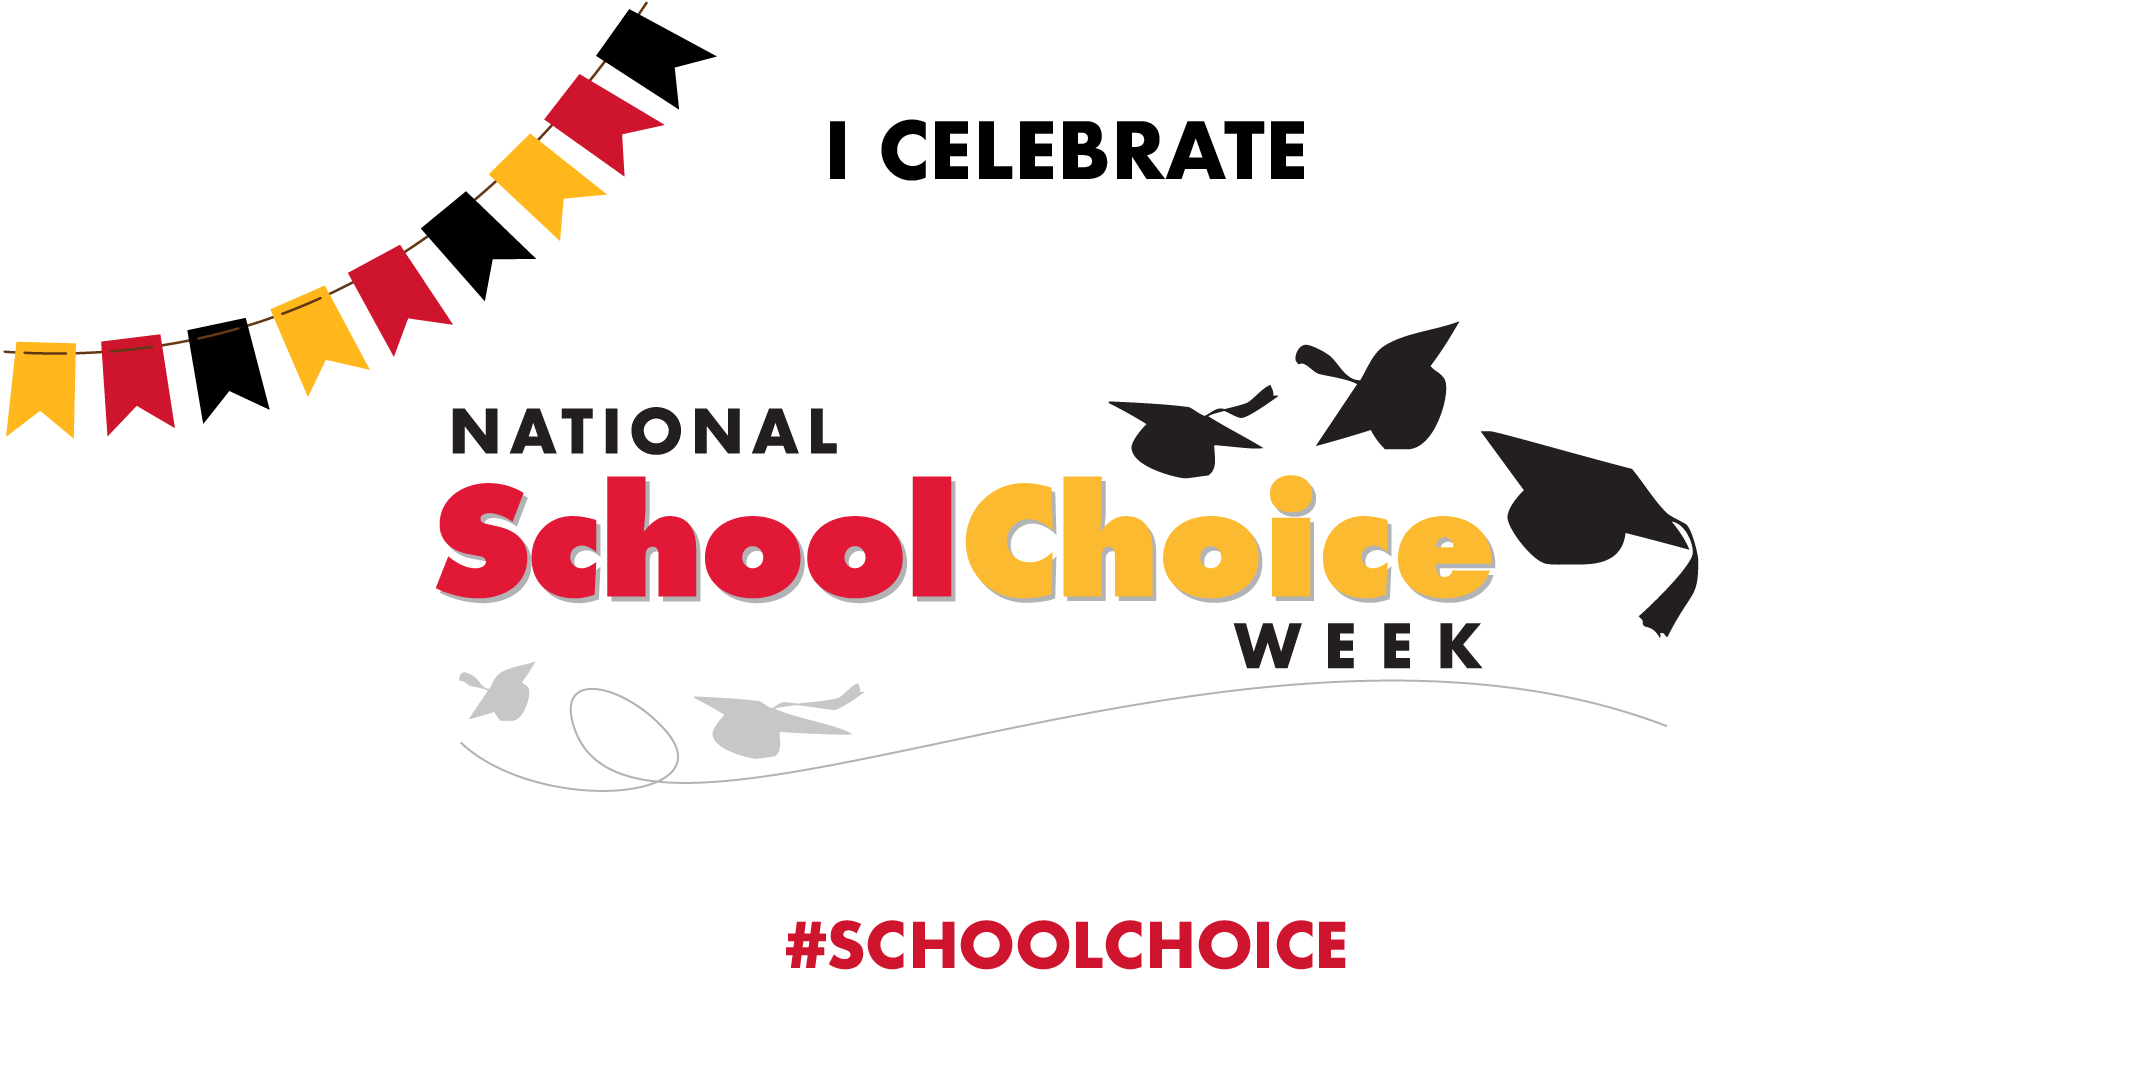 I Celebrate National School Choice Week badge with flags and grad caps